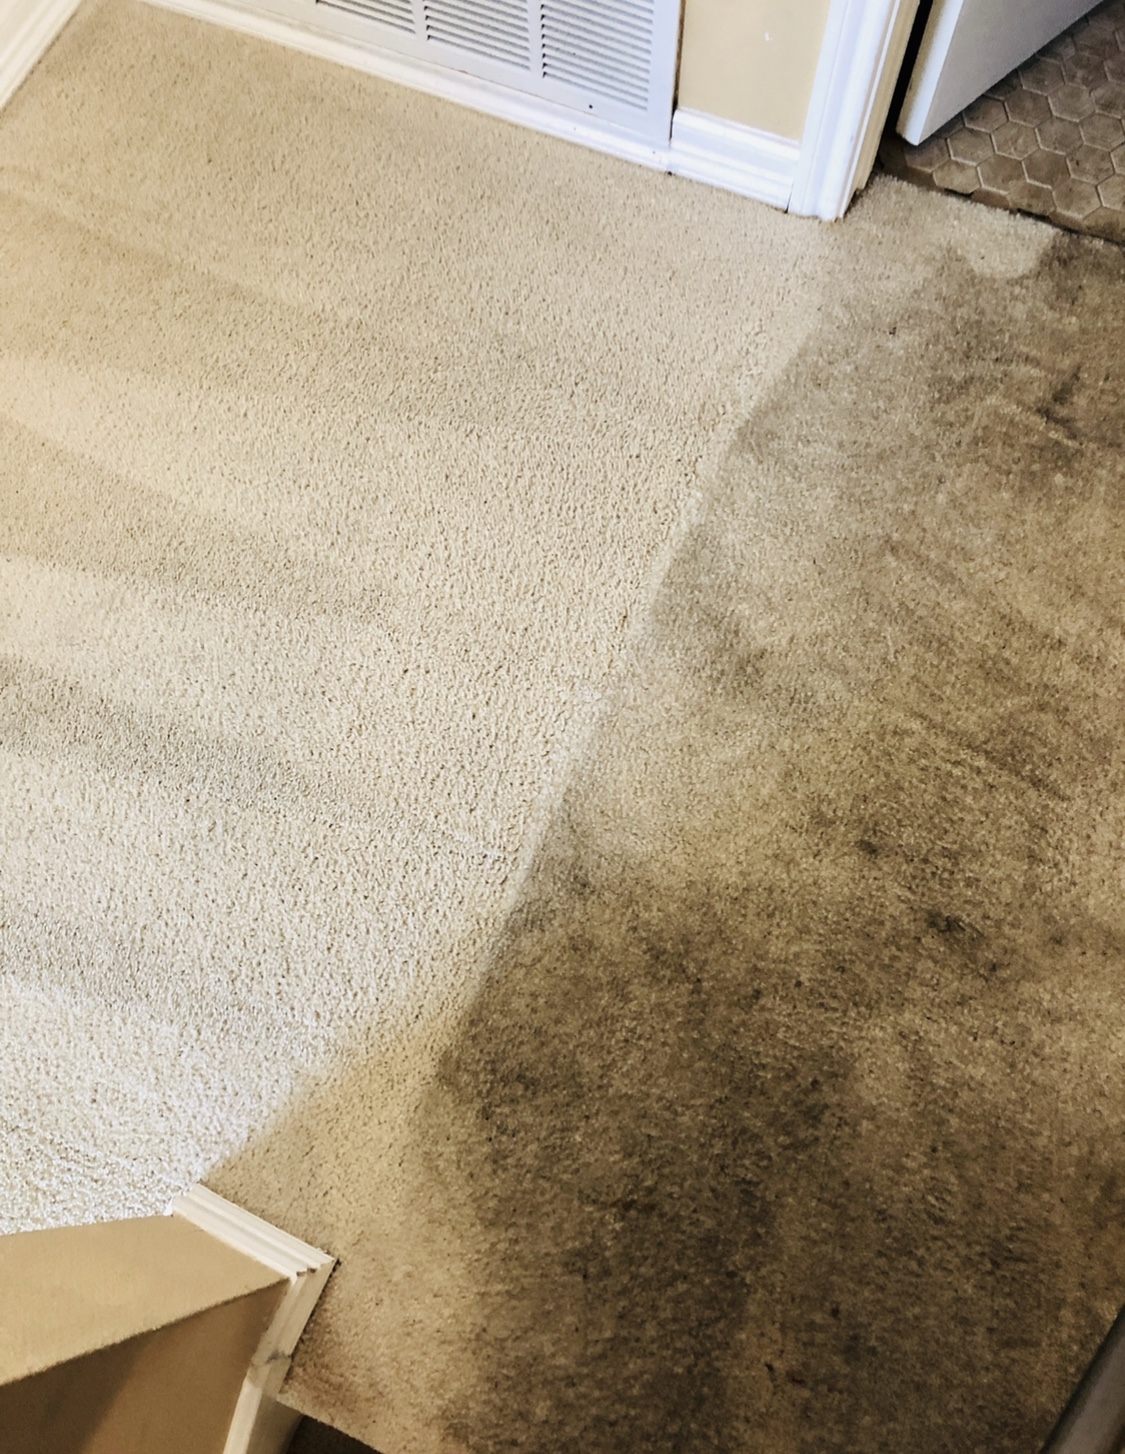 Dirty to Clean Carpet Cleaning San Antonio